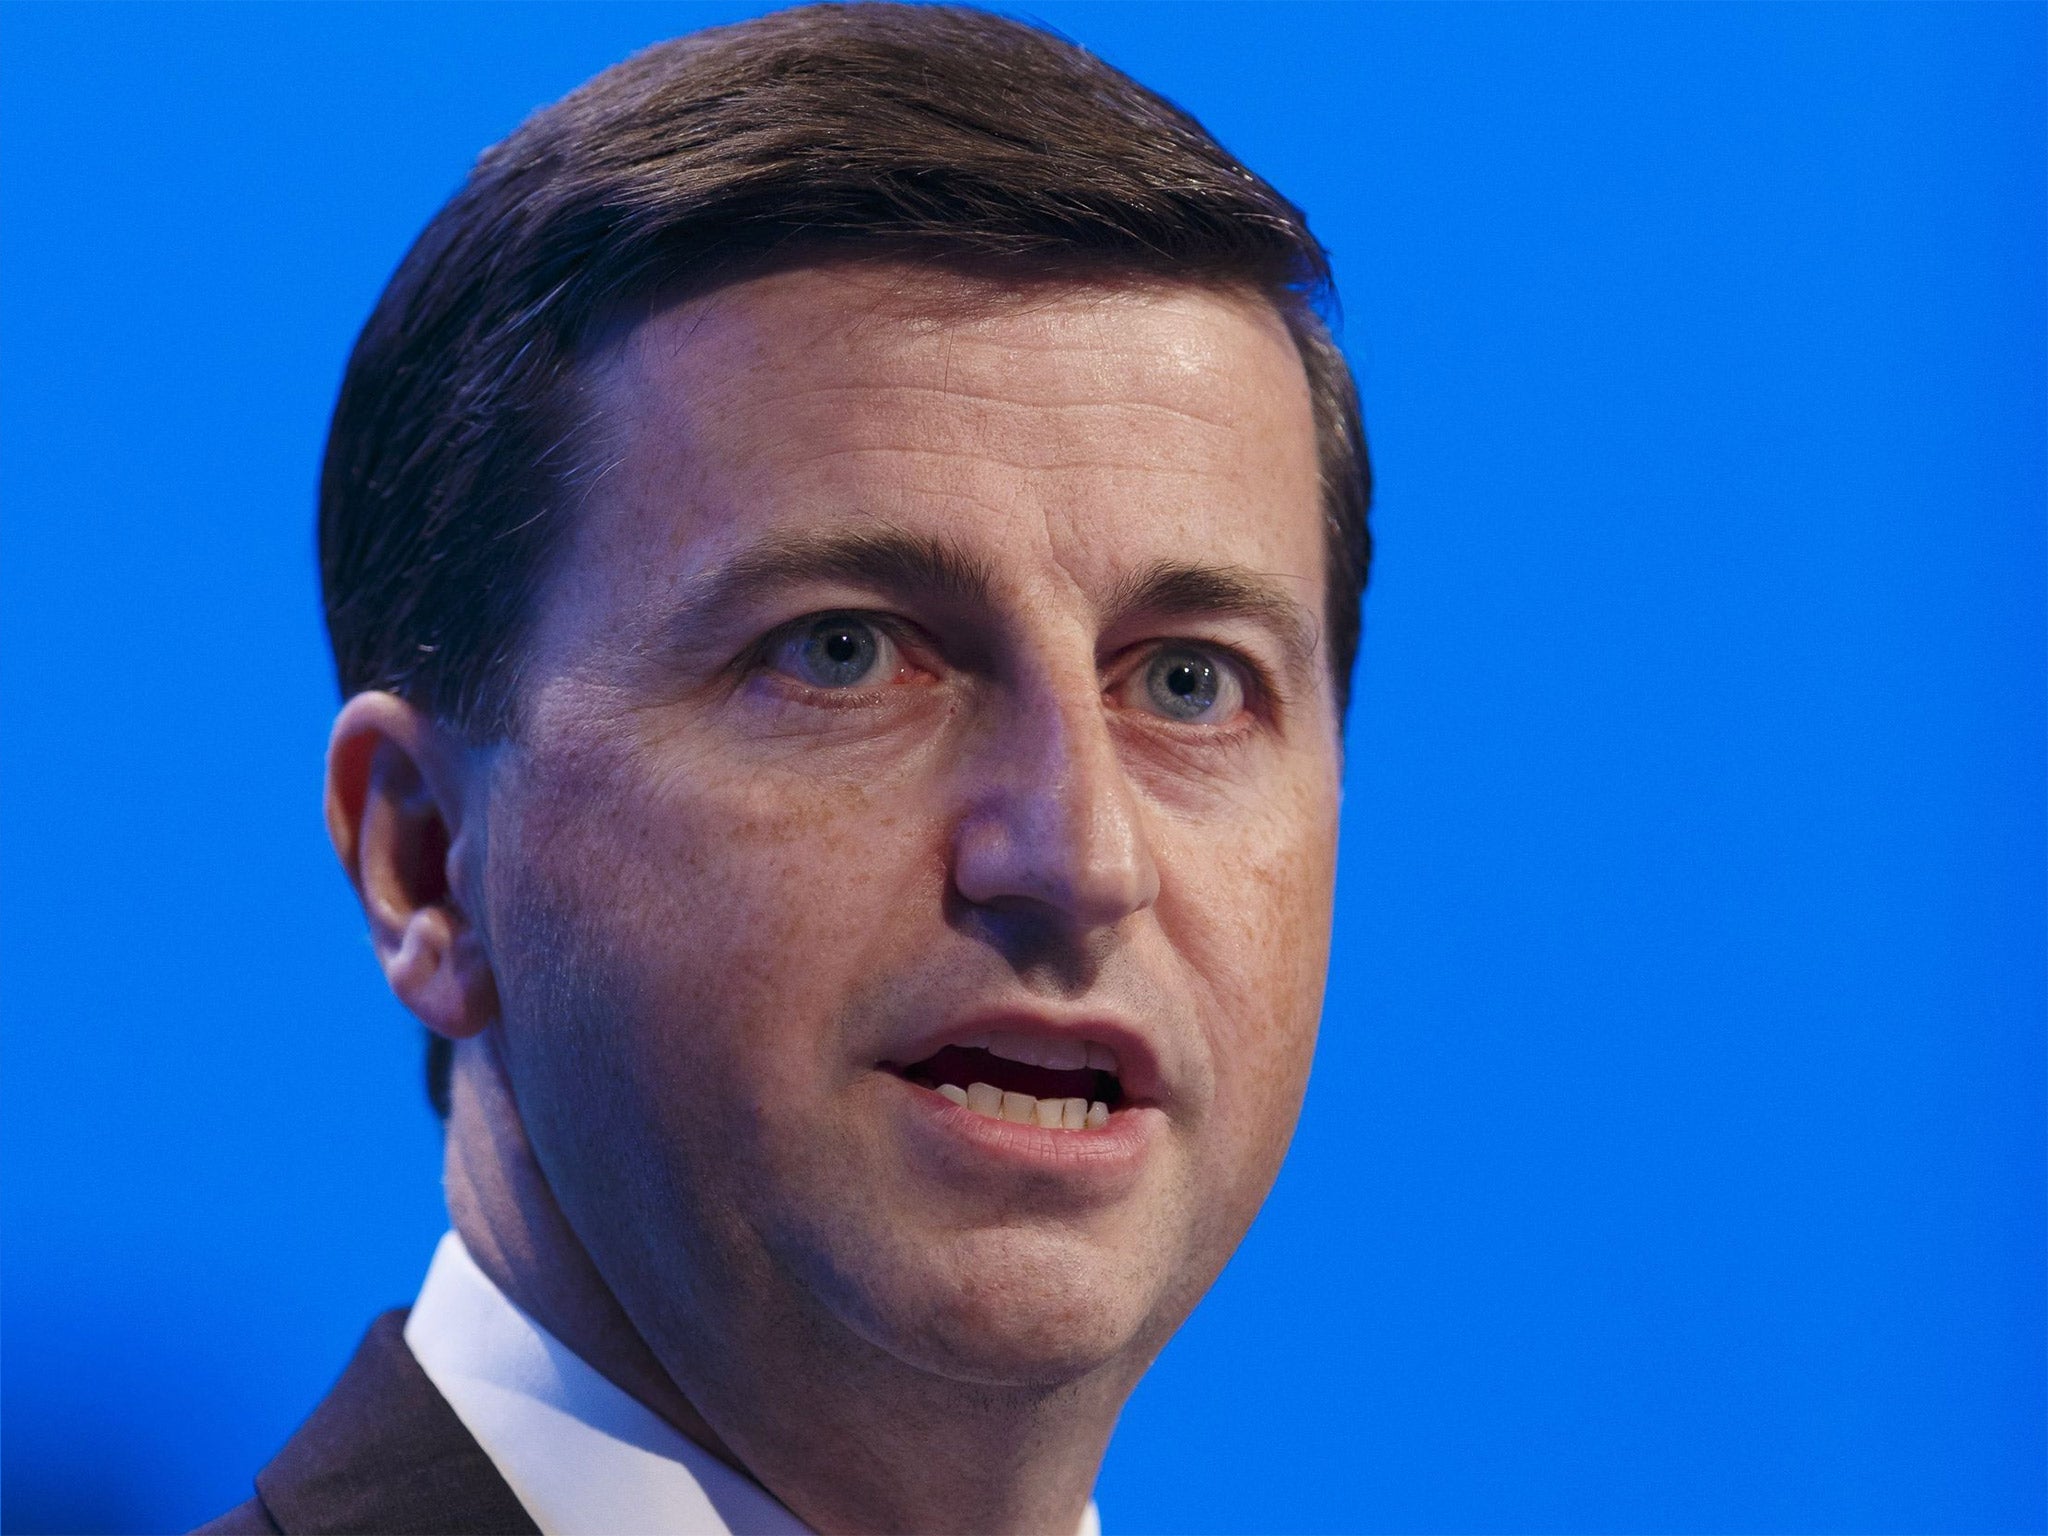 Douglas Alexander is said to have defended his own strategy